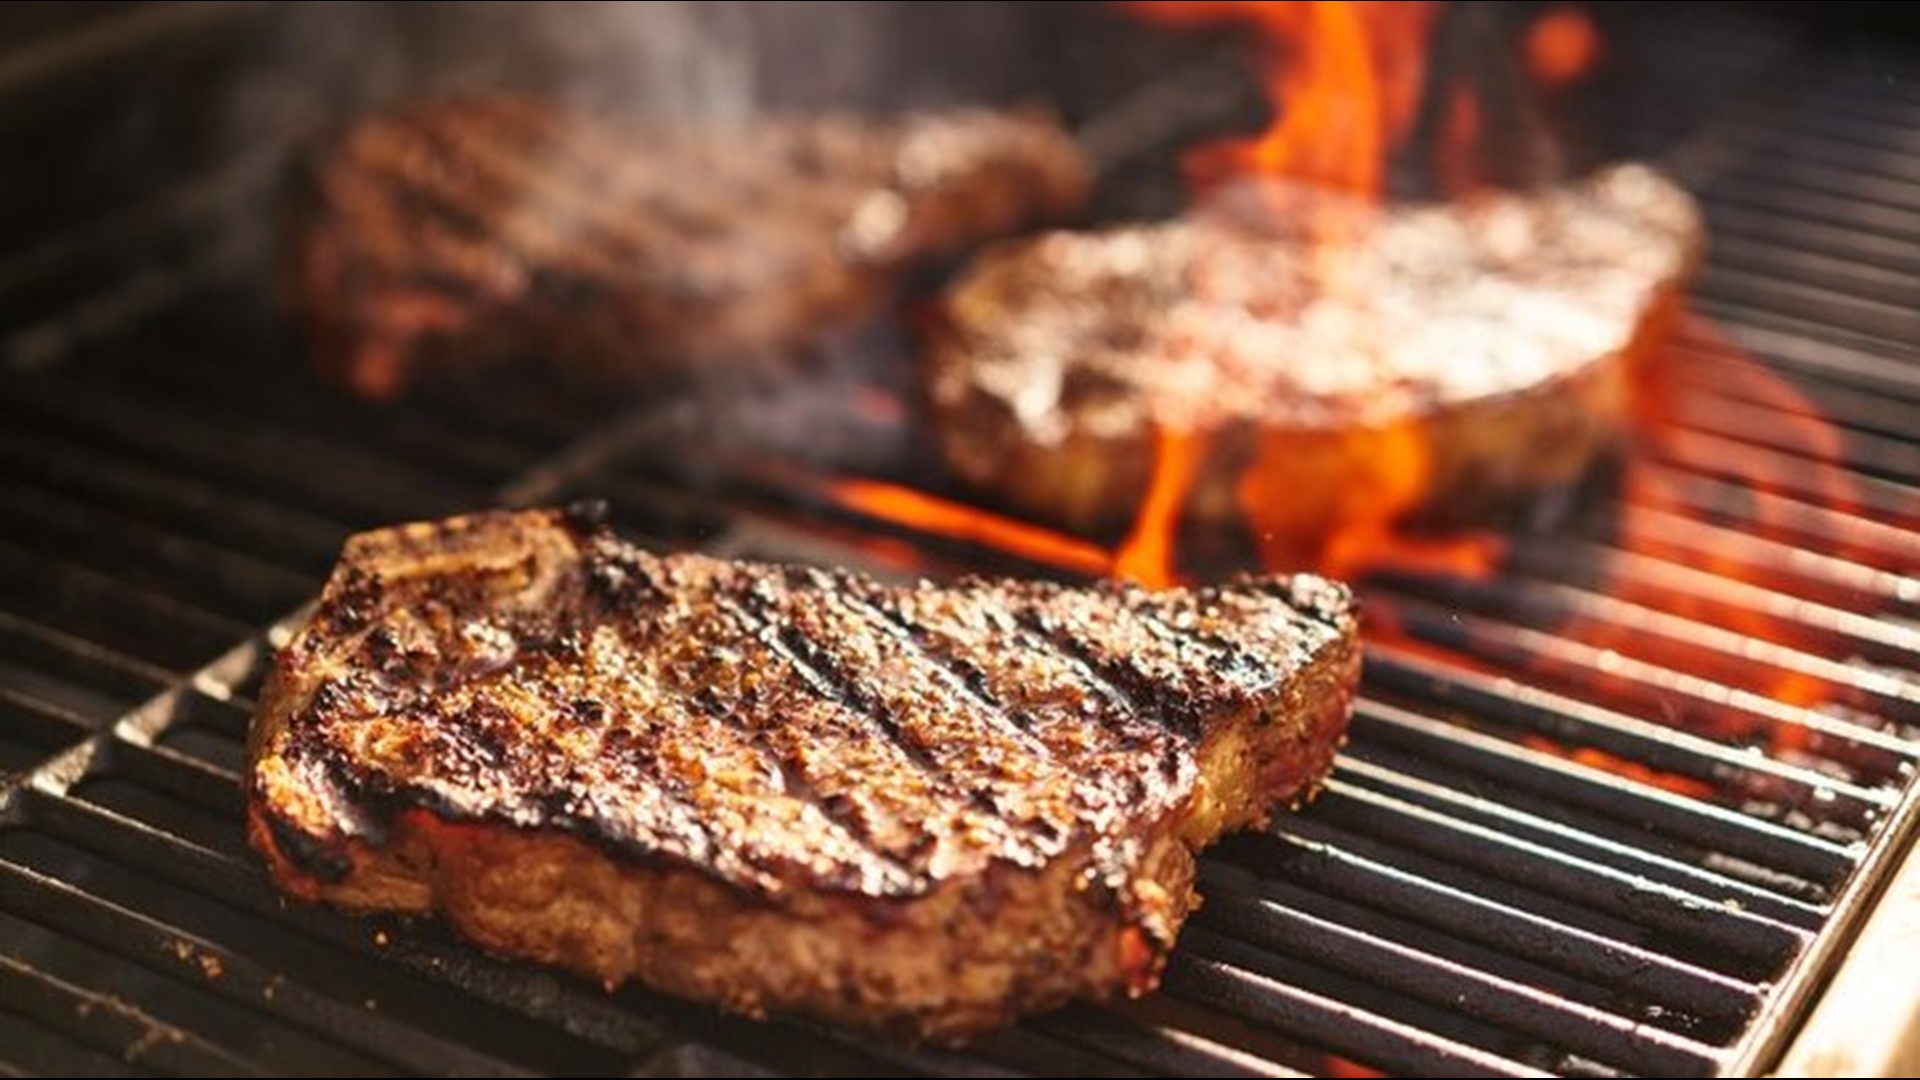 Memorial Day is only a few weeks away and it marks the official start to summer and the grilling season. If you need to “beef” up your steak grilling skills our friends at Beef. It’s What’s For Dinner. shared some tasty tips.